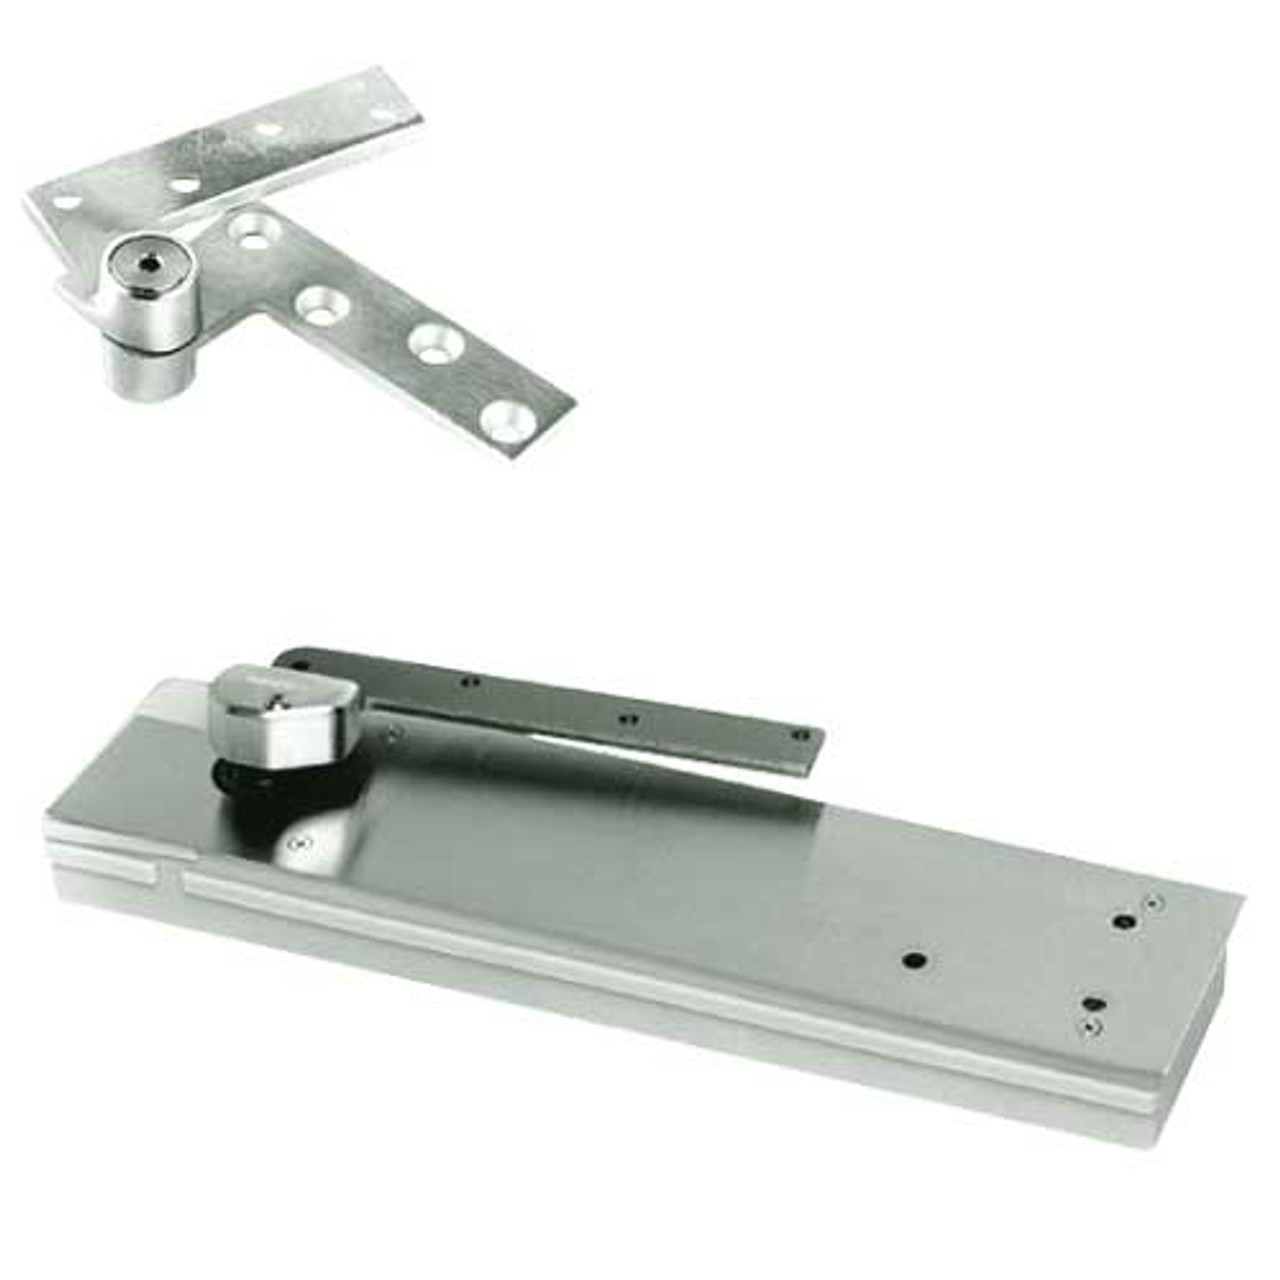 5103ABC105-LFP-LCC-LH-618 Rixson 51 Series 3/4" Offset Hung Shallow Depth Floor Closers in Bright Nickel Finish